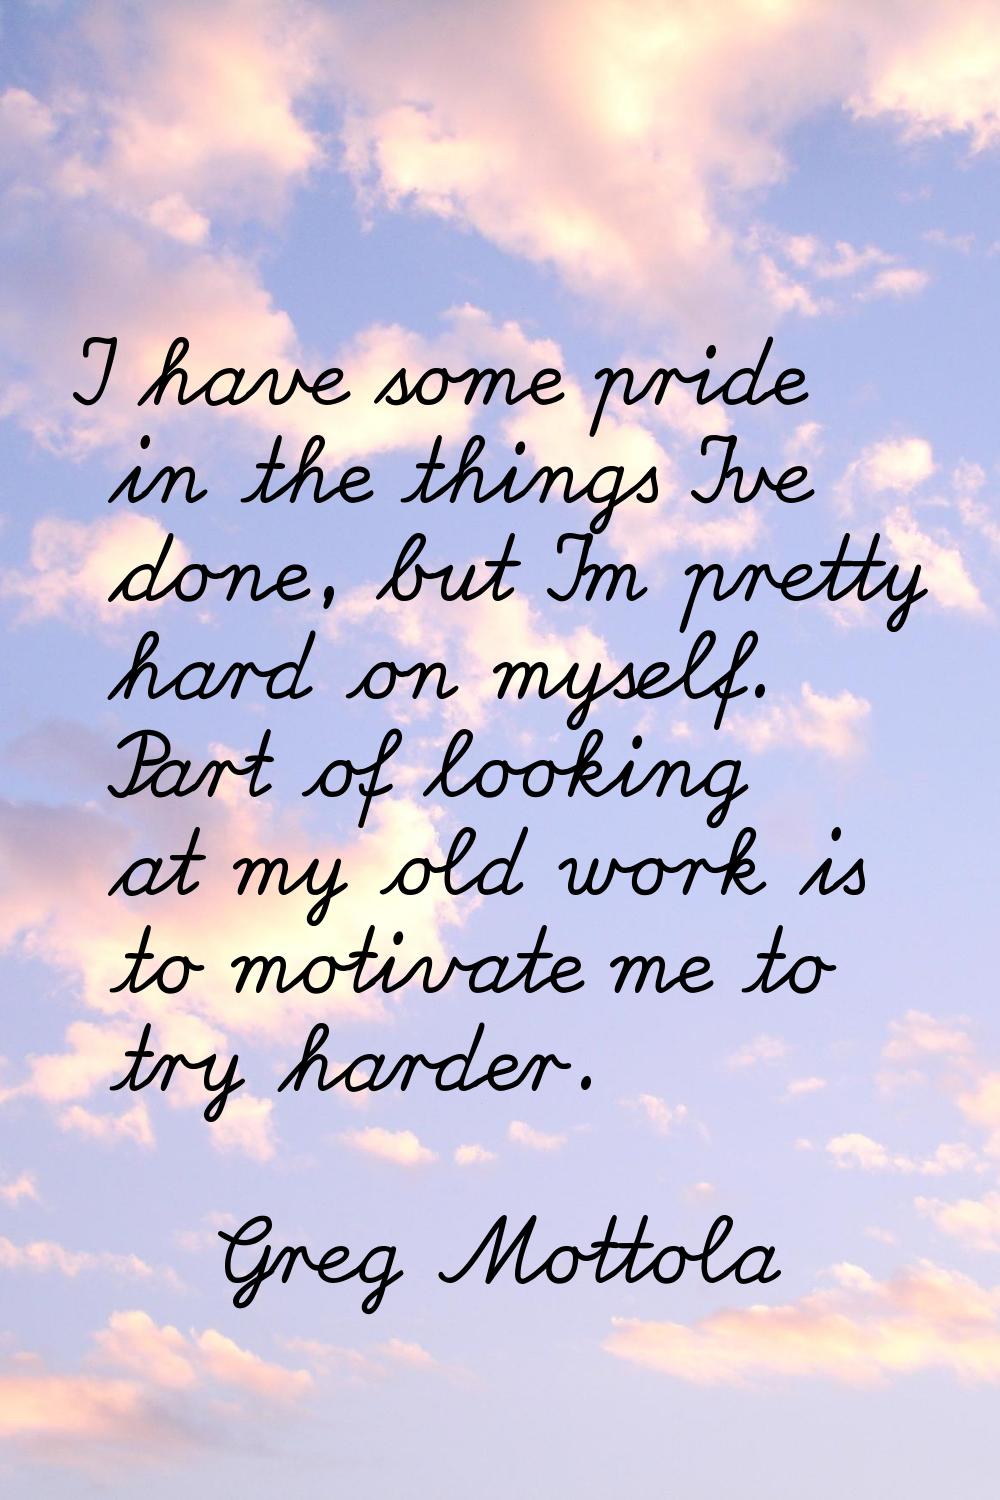 I have some pride in the things I've done, but I'm pretty hard on myself. Part of looking at my old